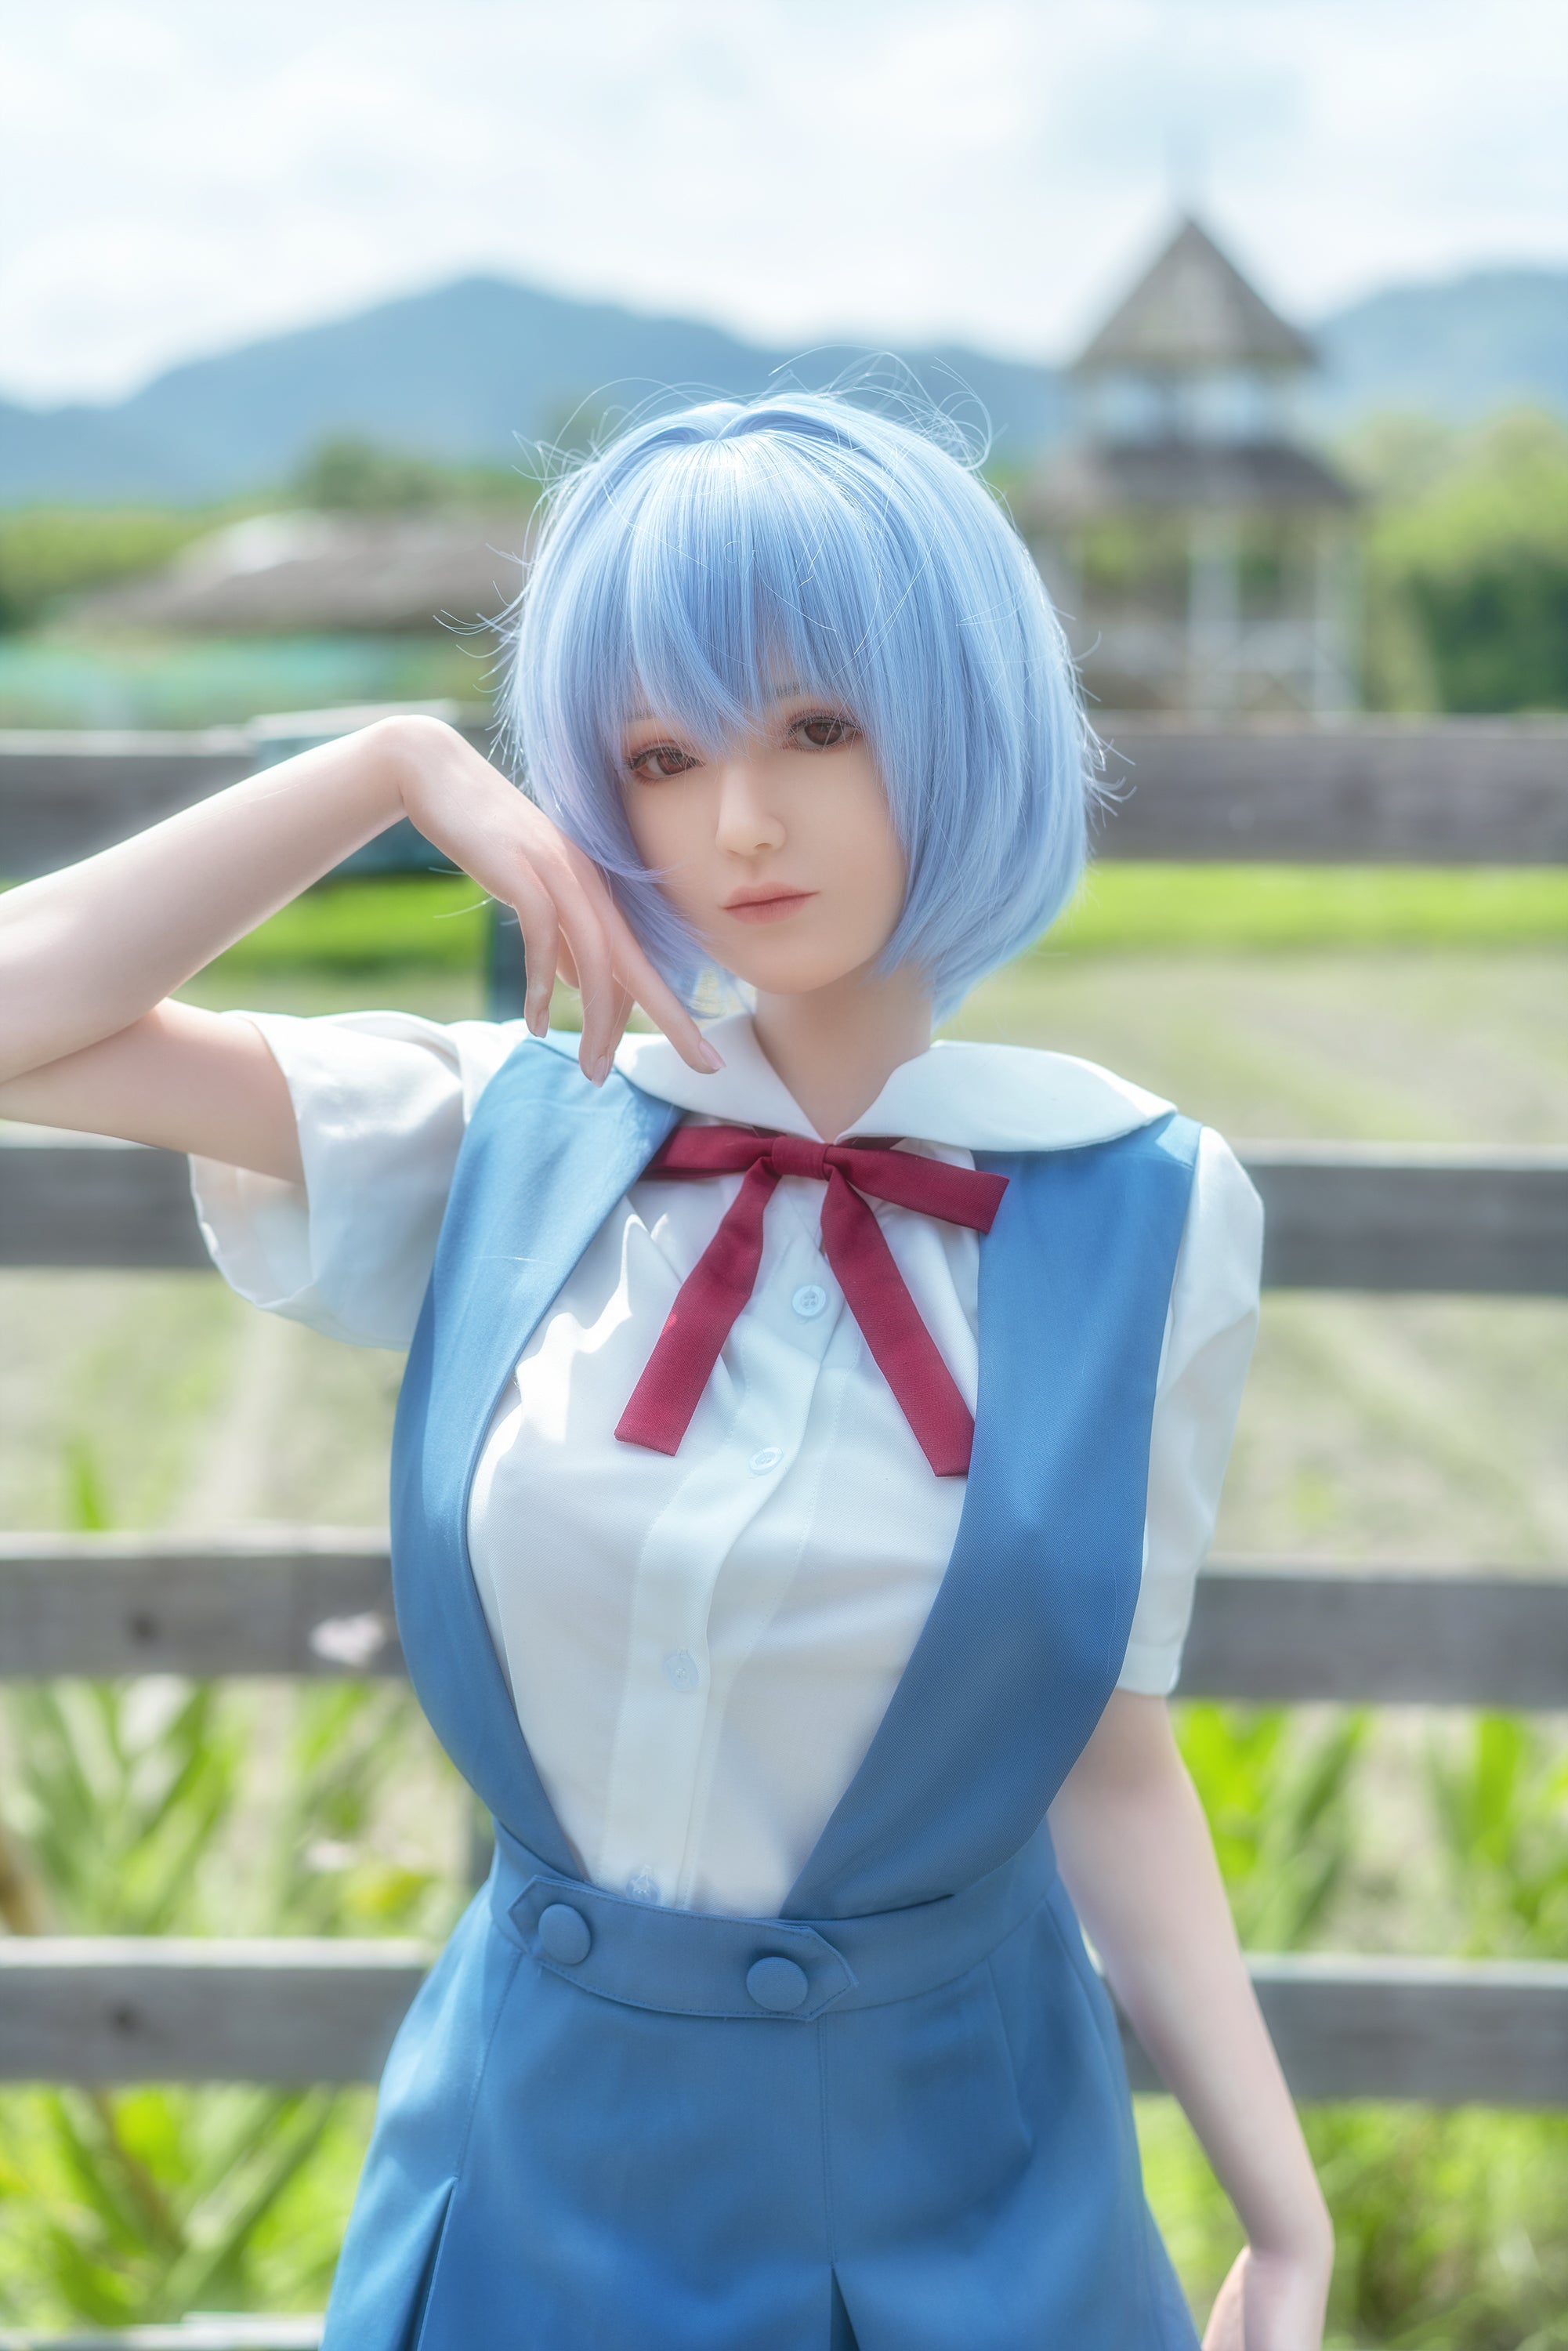 Game Lady 156 cm A Silicone - Rei Ayanami | Buy Sex Dolls at DOLLS ACTUALLY